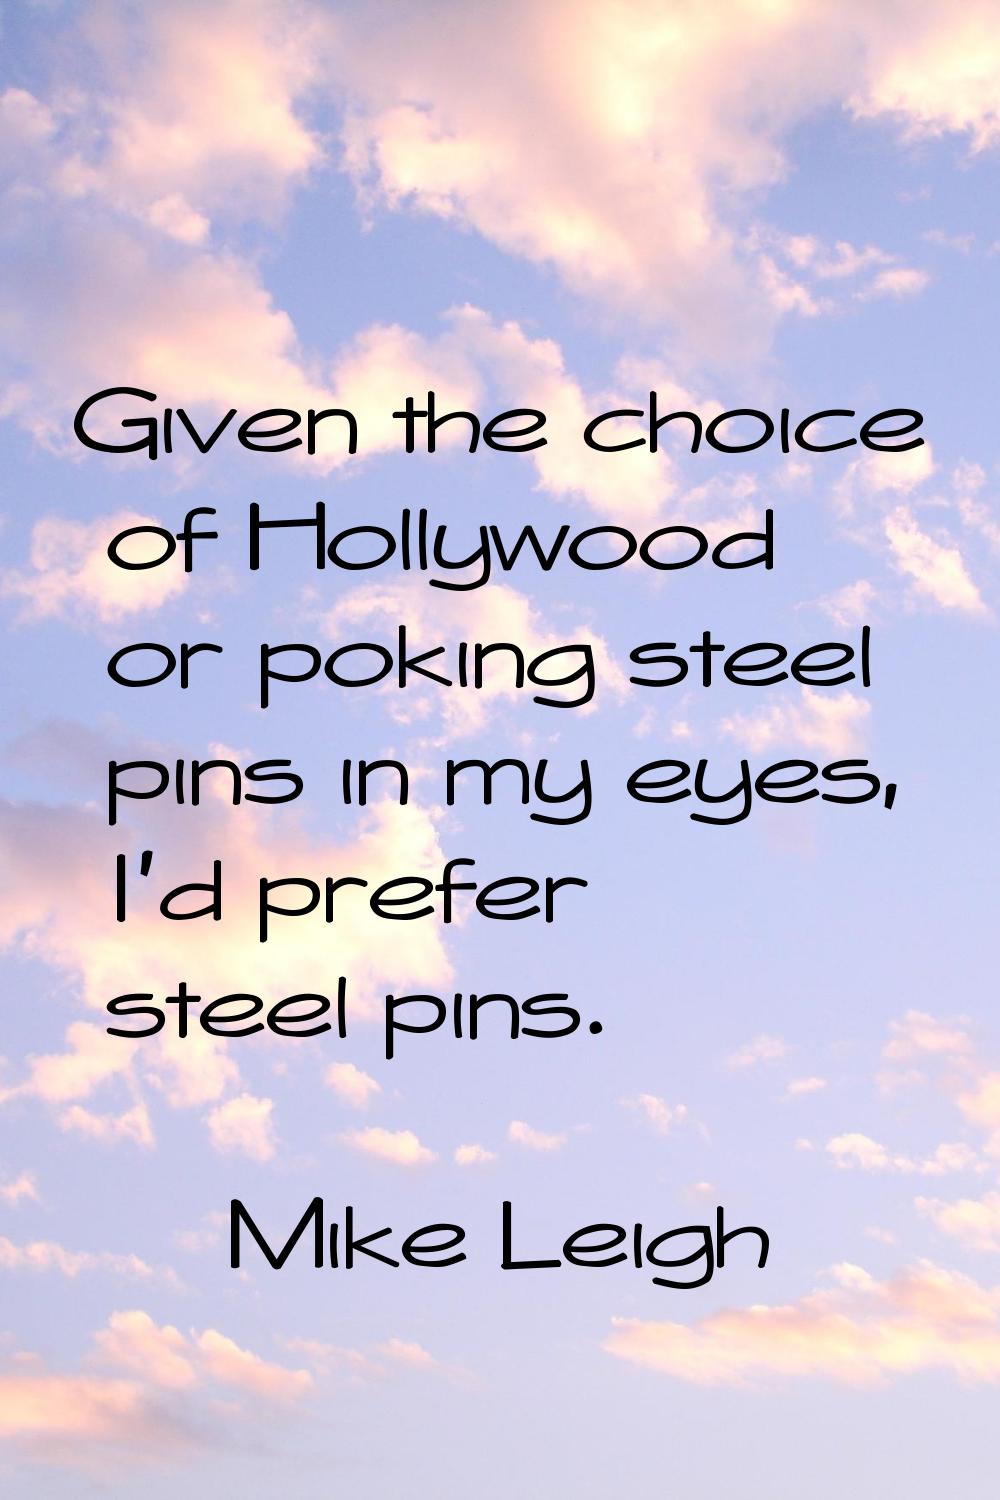 Given the choice of Hollywood or poking steel pins in my eyes, I'd prefer steel pins.